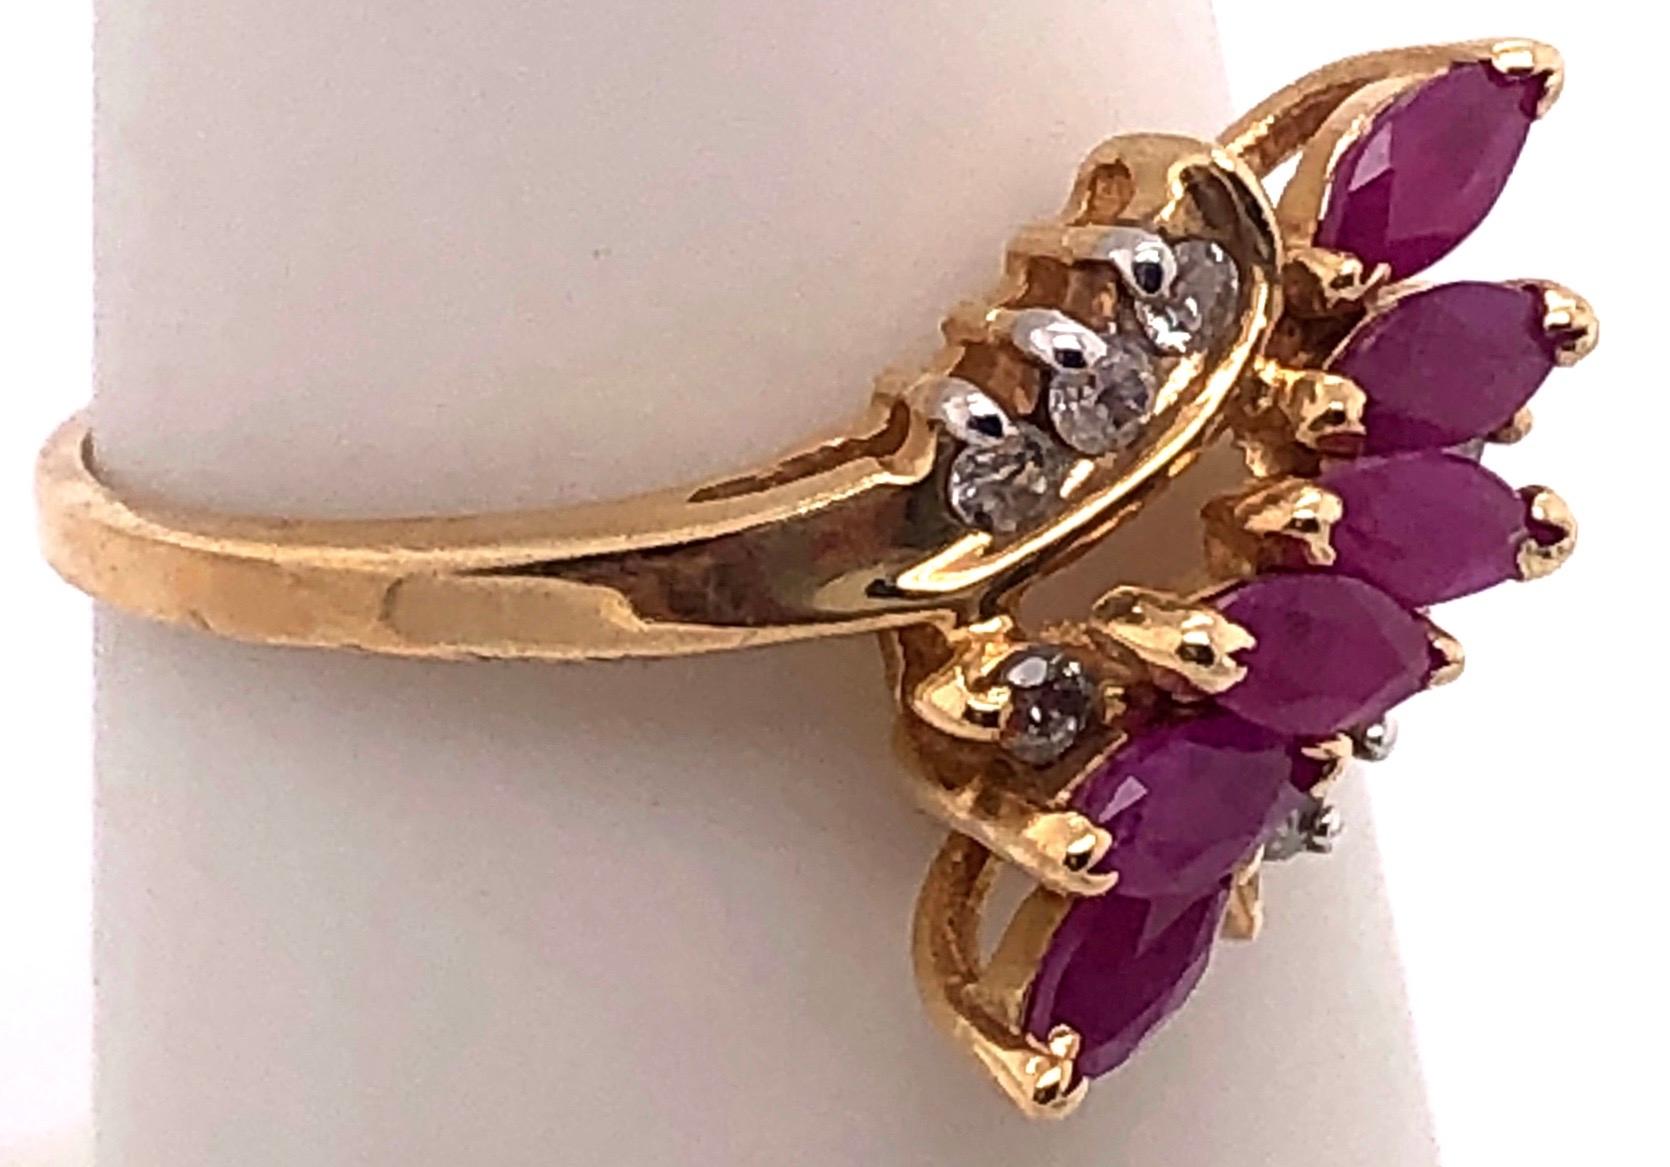 14 Karat Yellow Gold Contemporary Ruby Ring With Diamond Accents Size 6.75
0.05 Total diamond weight.
Size 6.75
3.23 grams total weight.